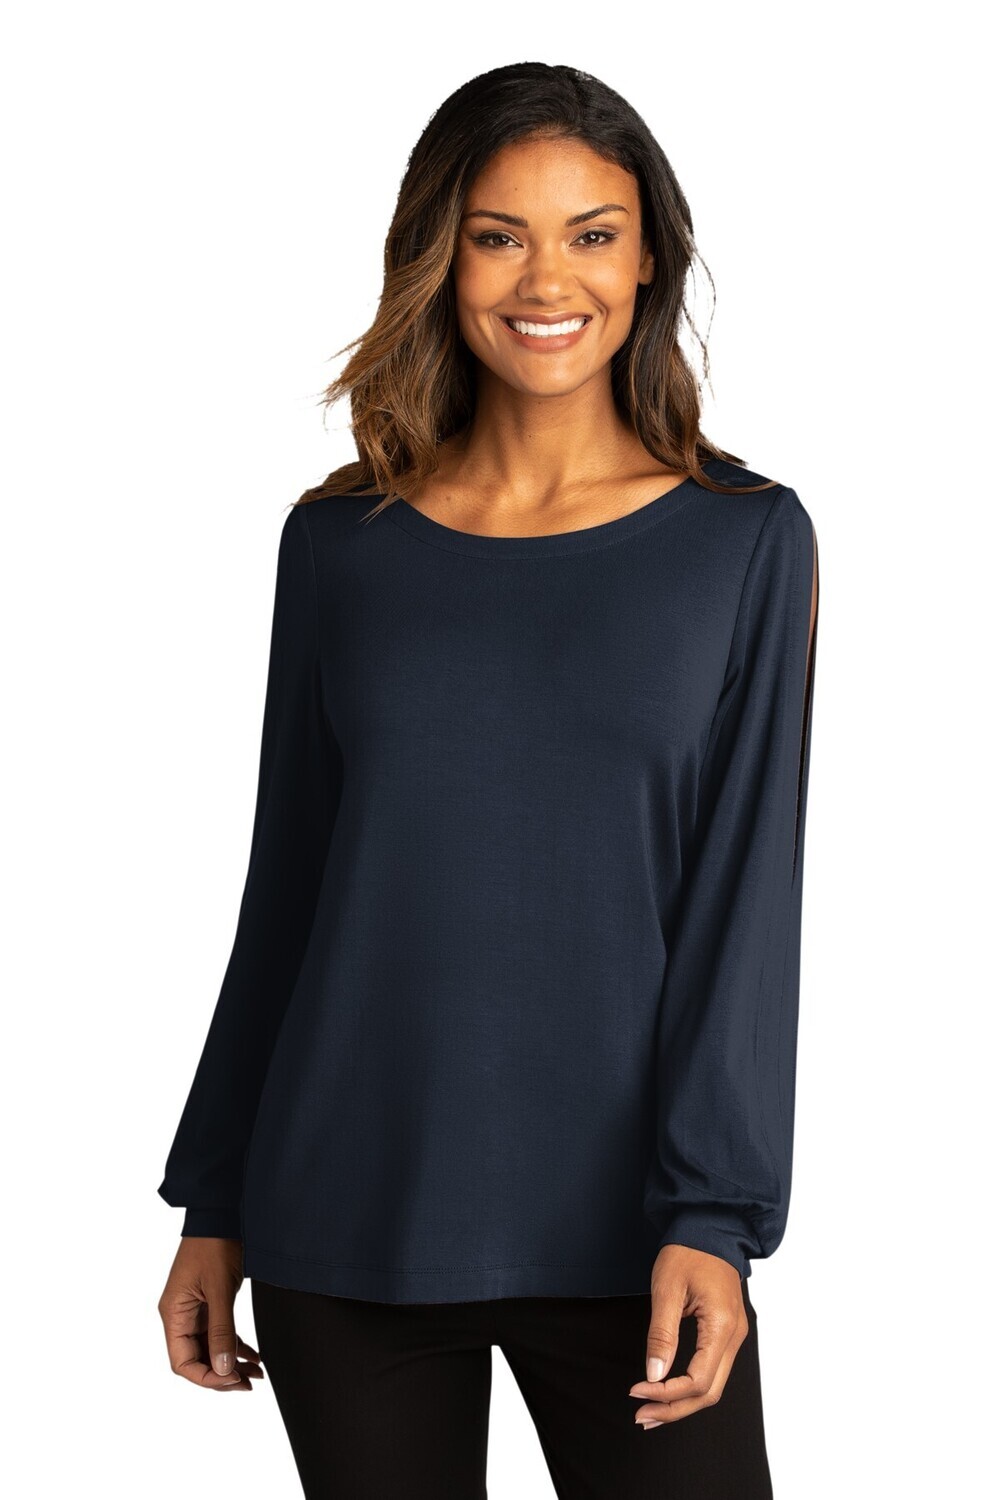 PORT AUTHORITY LADIES LUXE KNIT TOP (LK5600) RIVER NAVY BLUE - XL